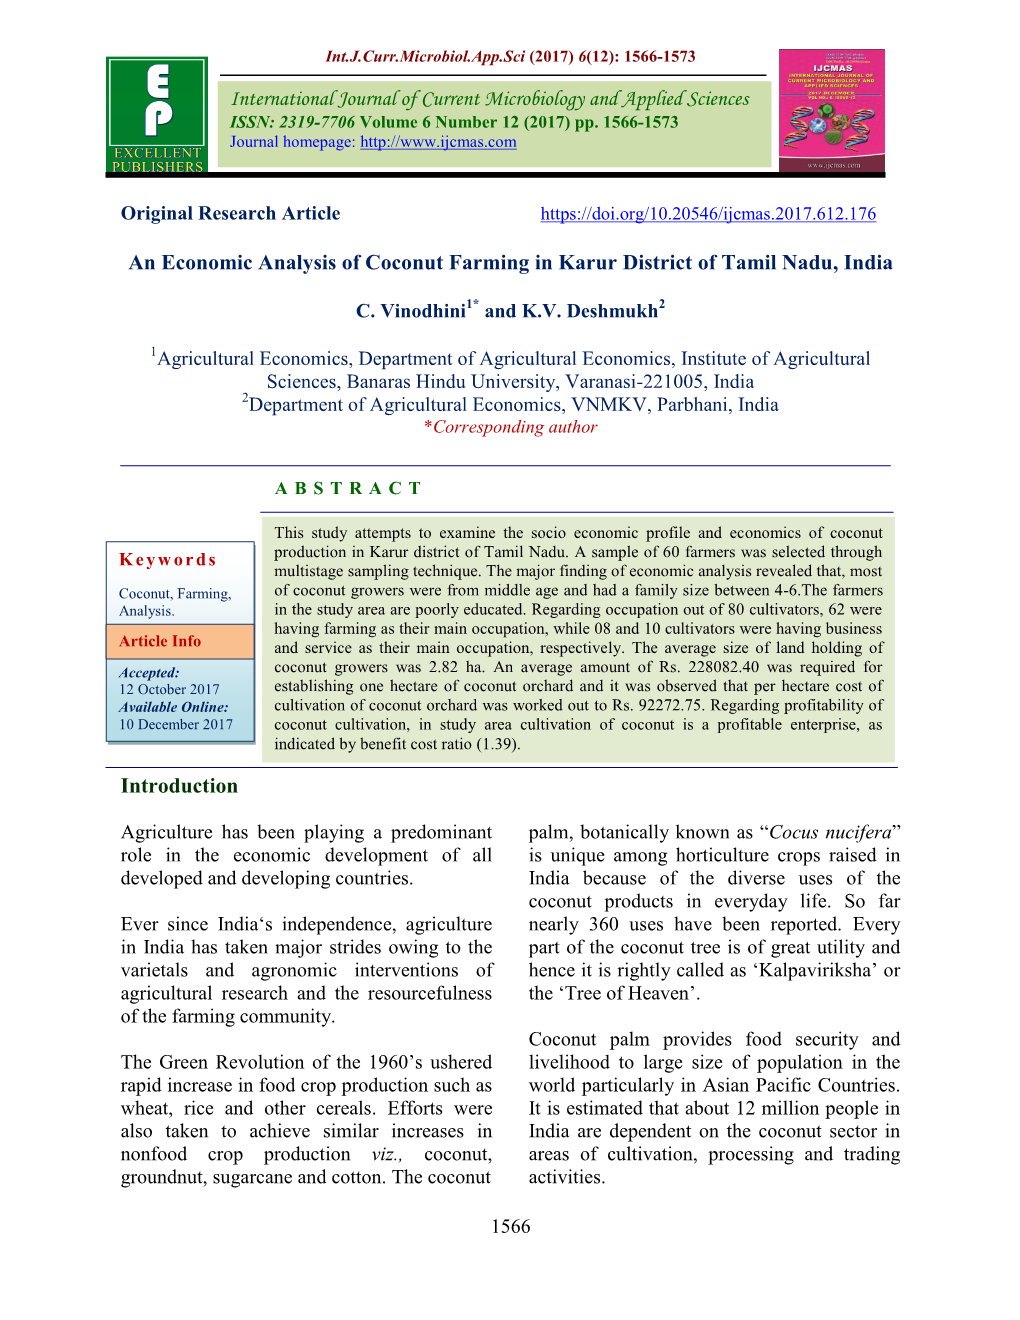 An Economic Analysis of Coconut Farming in Karur District of Tamil Nadu, India